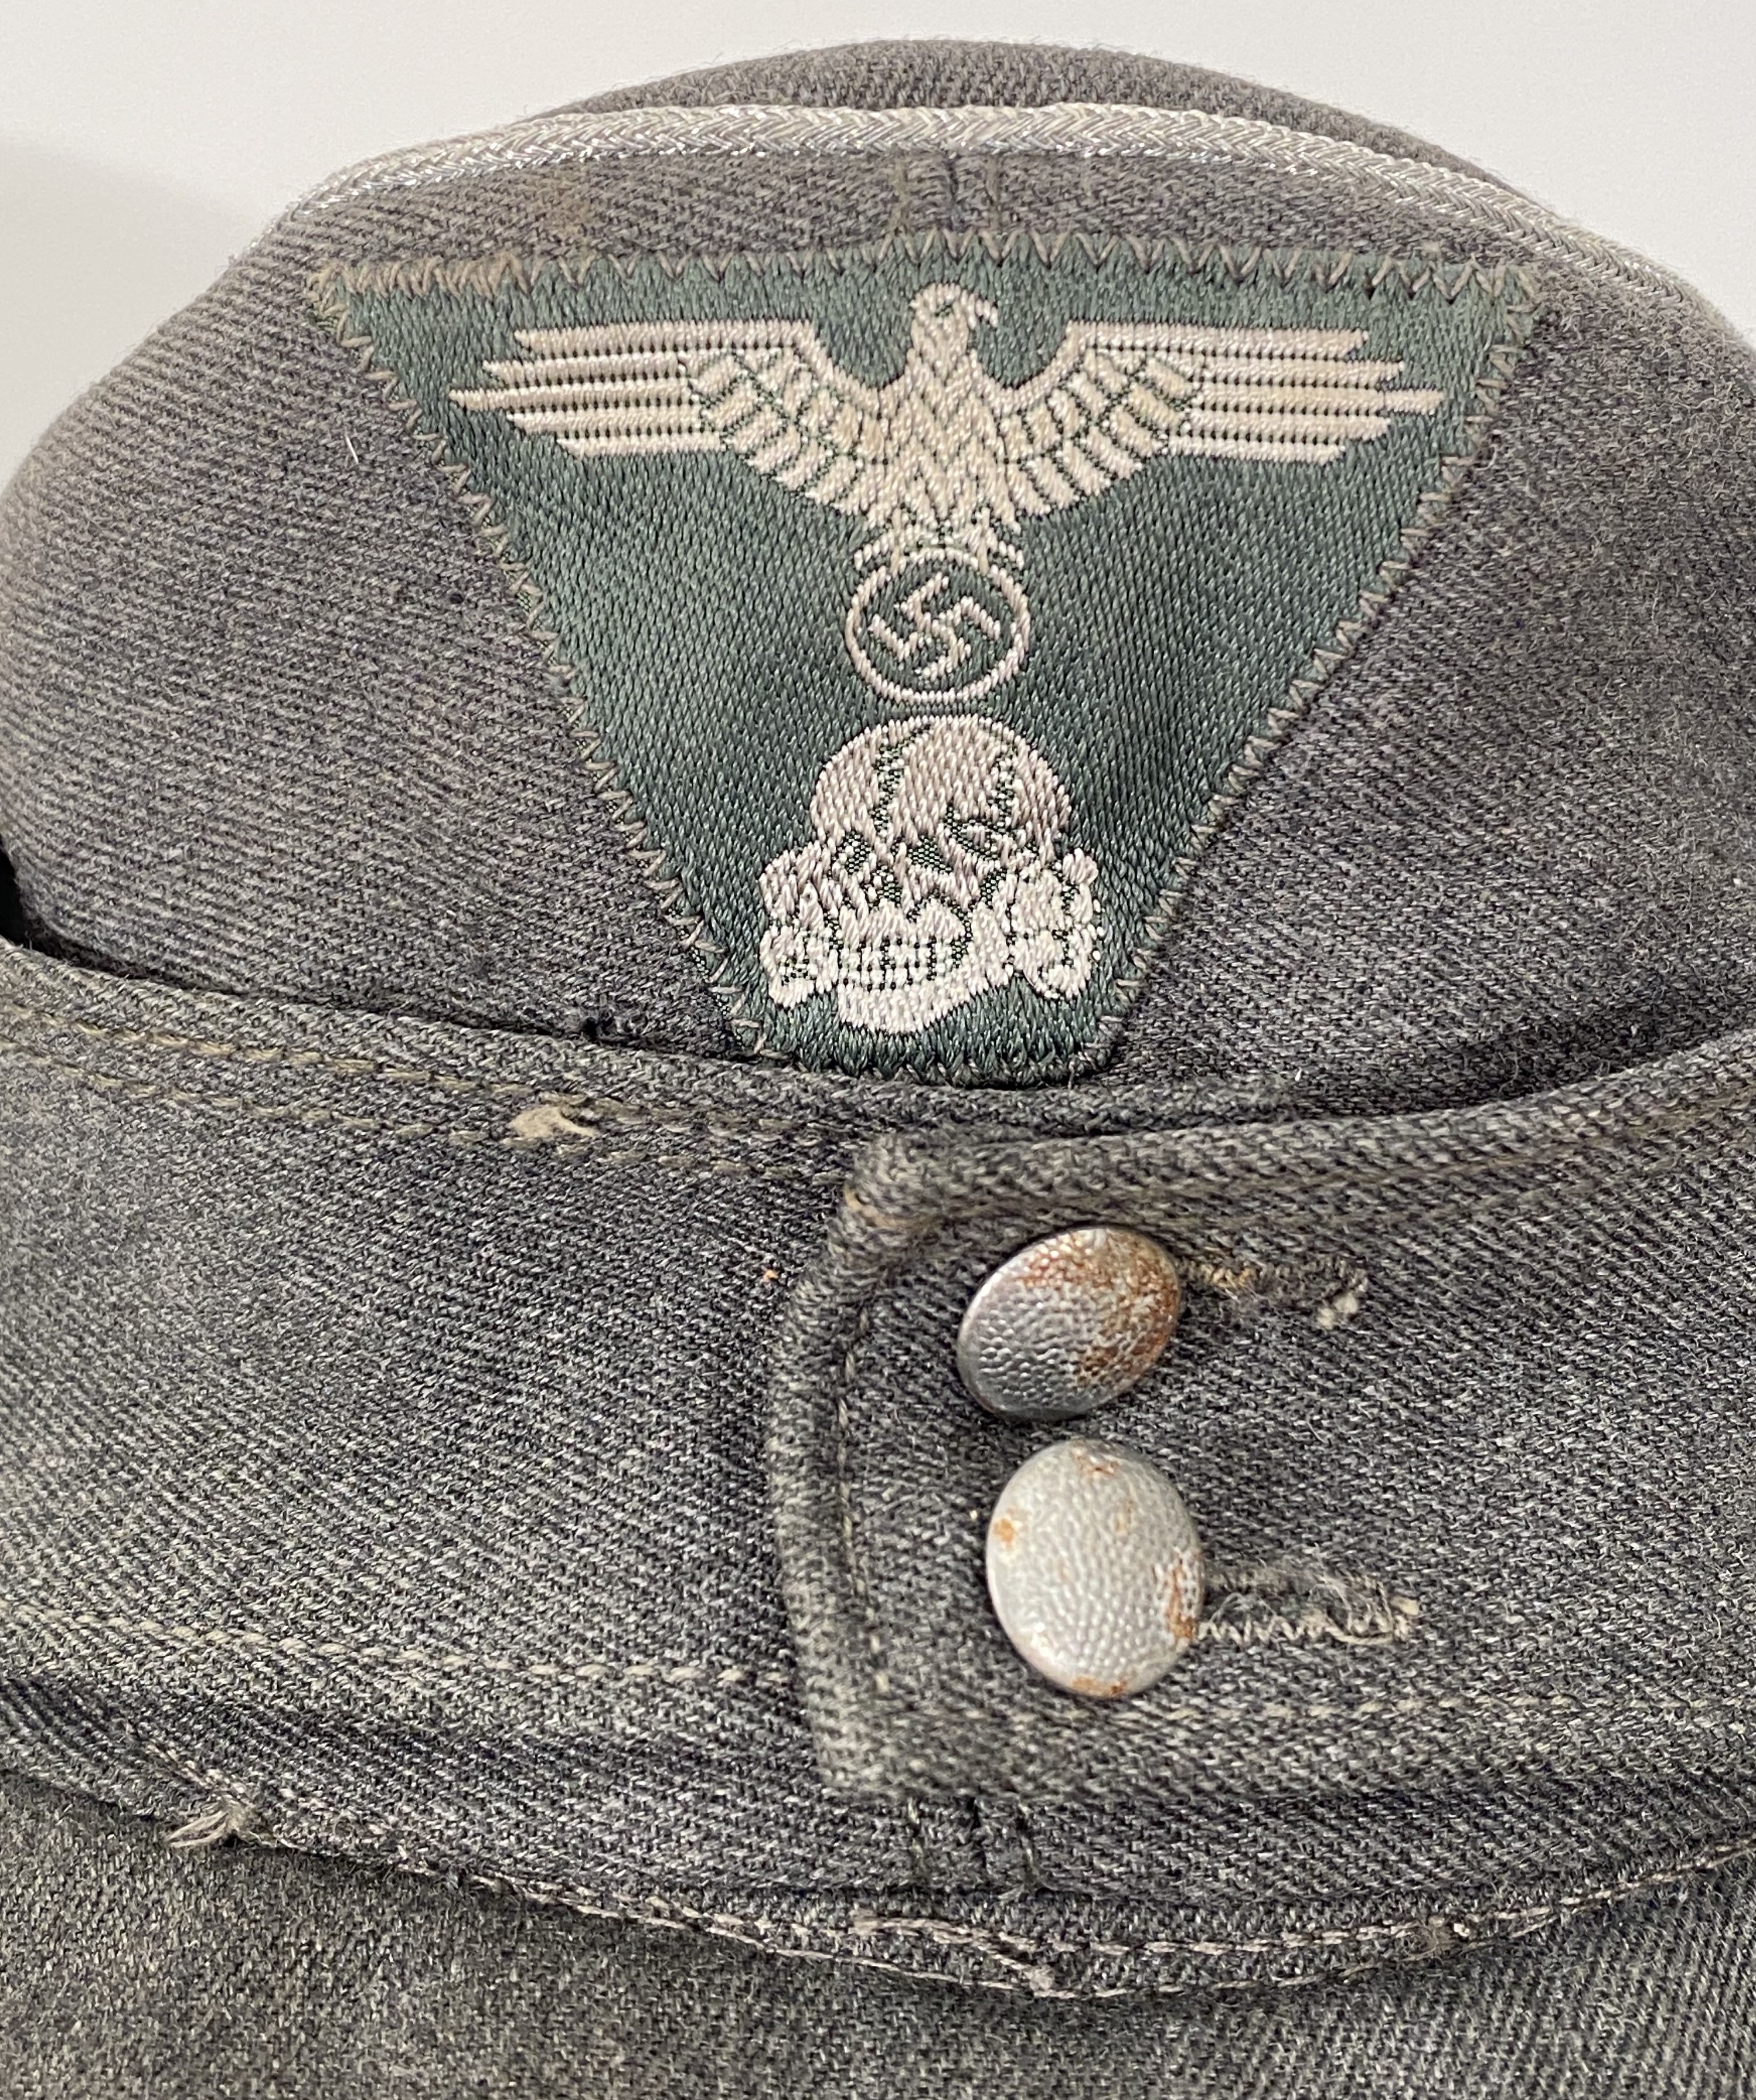 German Third Reich Waffen SS Officer M43 field cap A fine example of grey gaberdine with rayon - Image 2 of 3